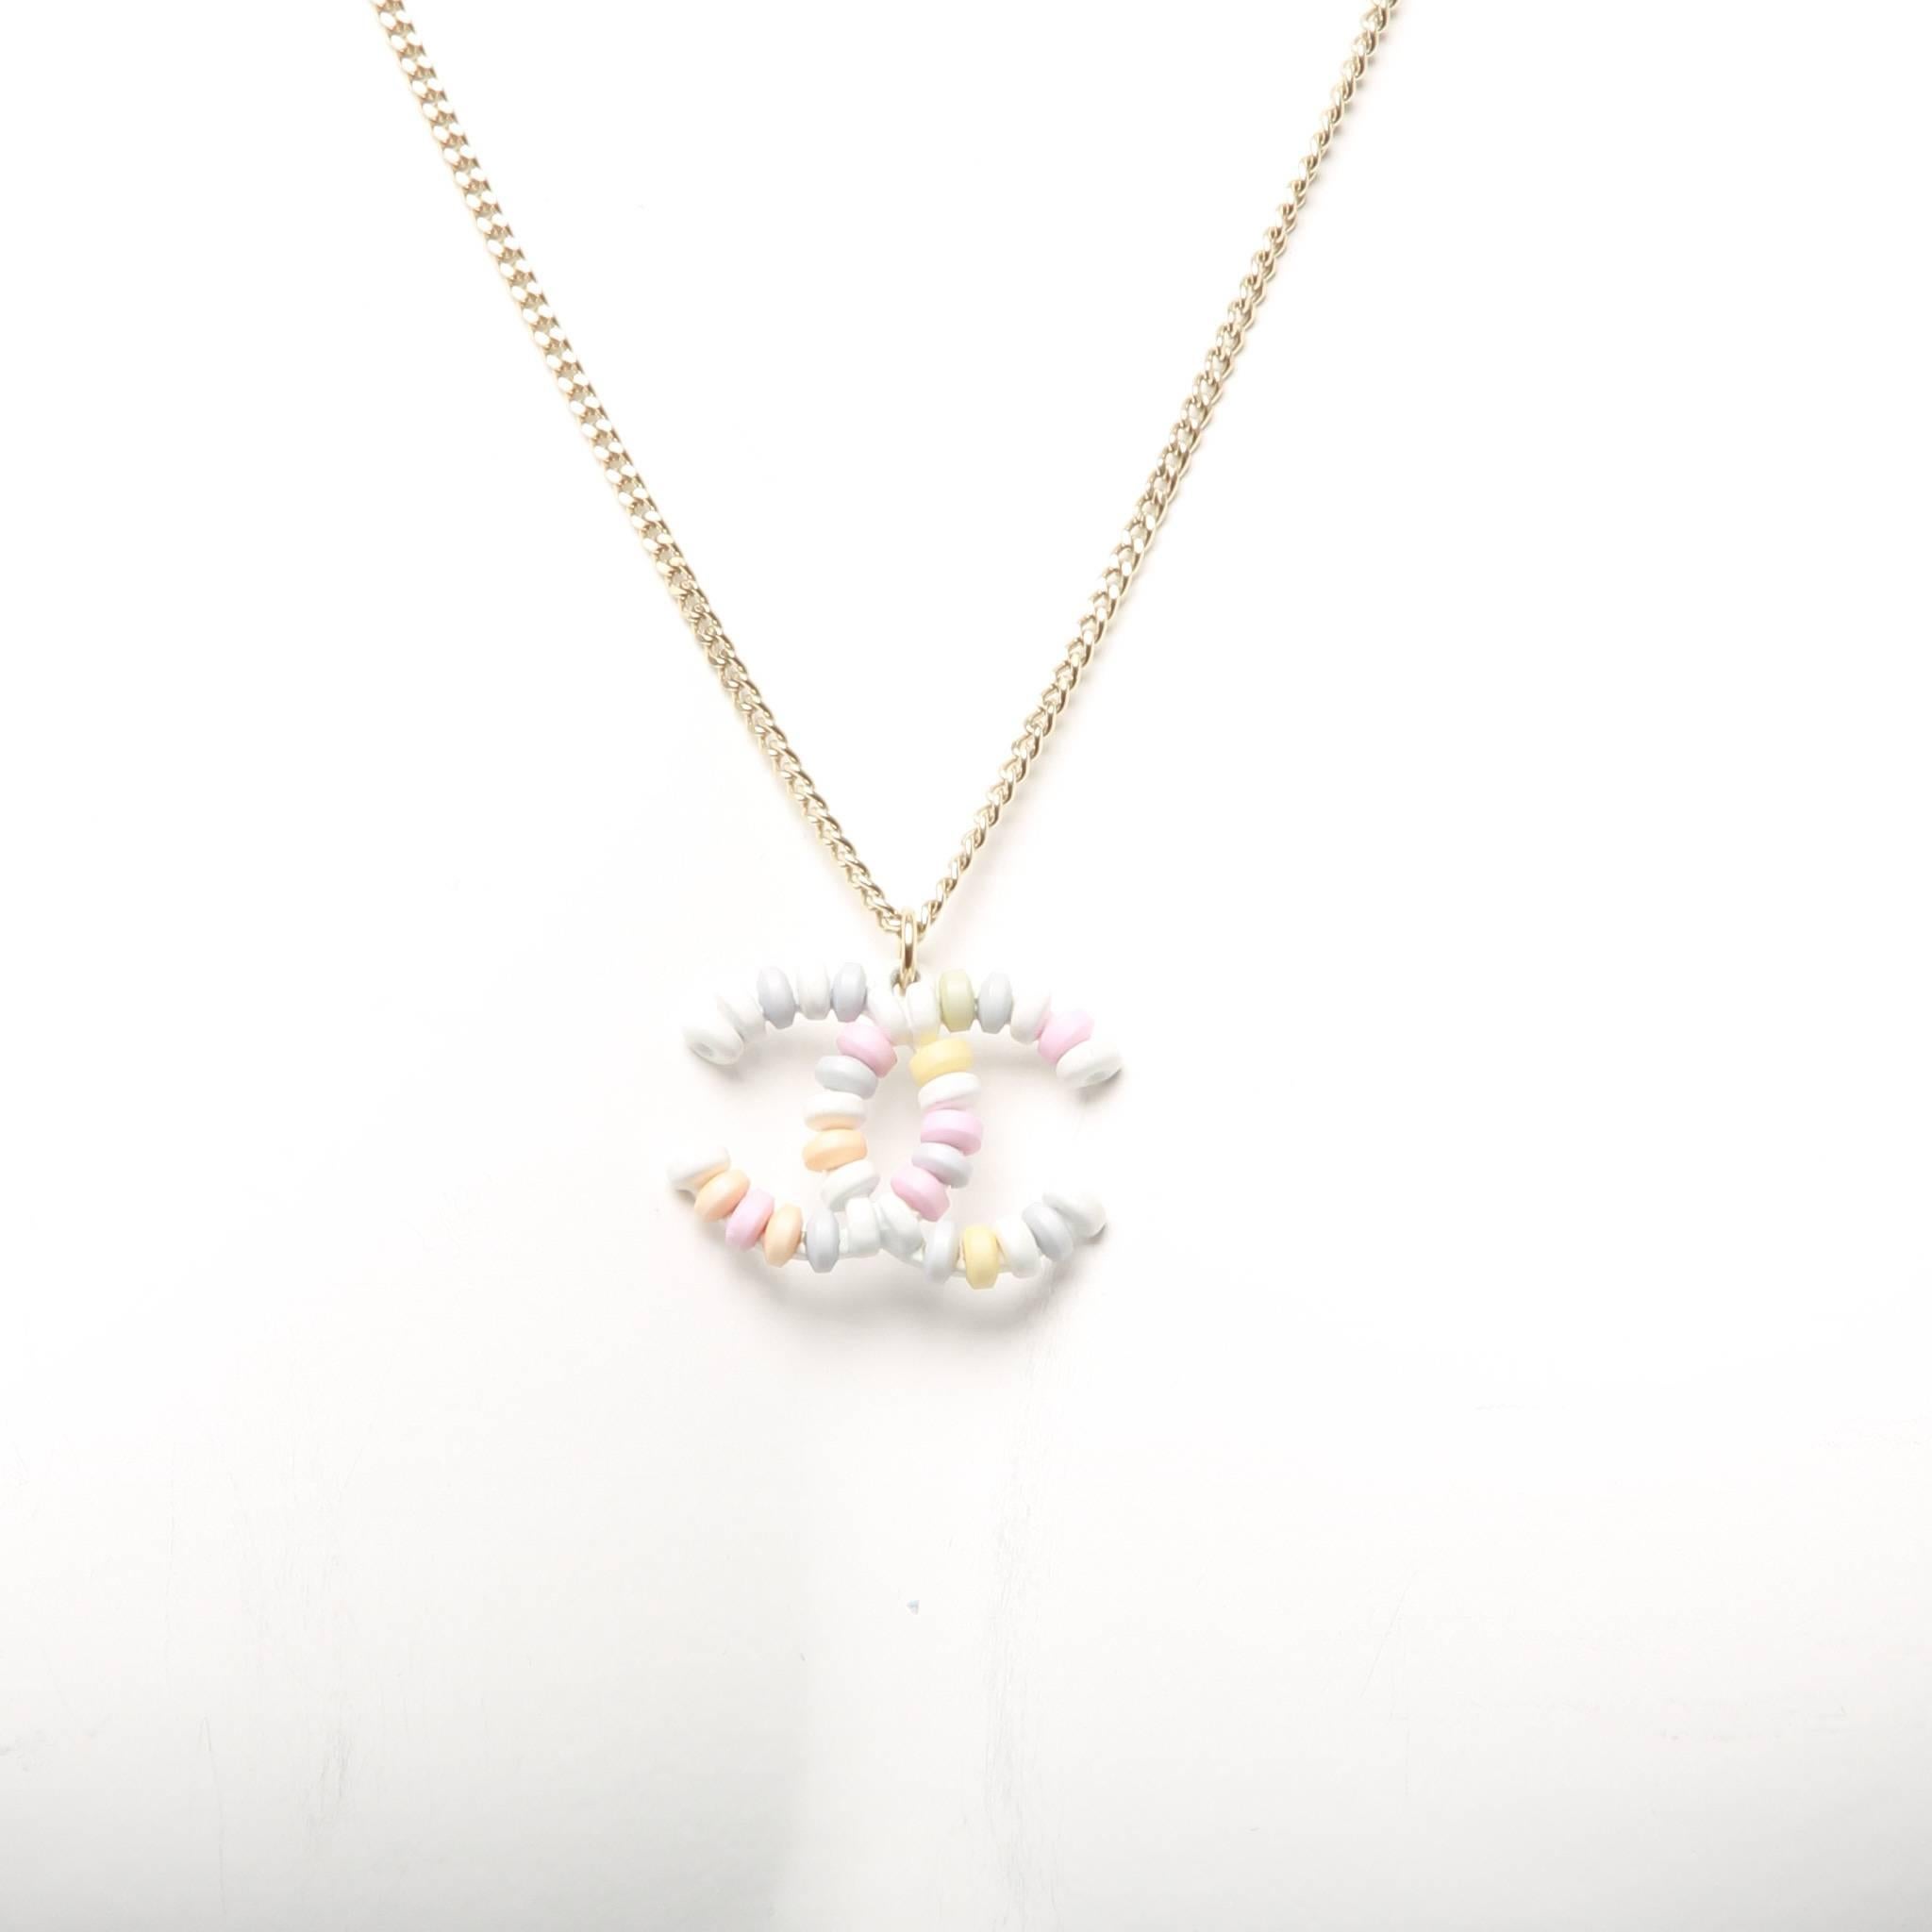 Limited edition. From the Pre-Spring 2014 Collection. White and multicolor Chanel resin beaded interlocking CC pendant on a simple very pale gold-tone chain with lobster clasp closure. Includes authentic pouch and box. 

Chain features two links